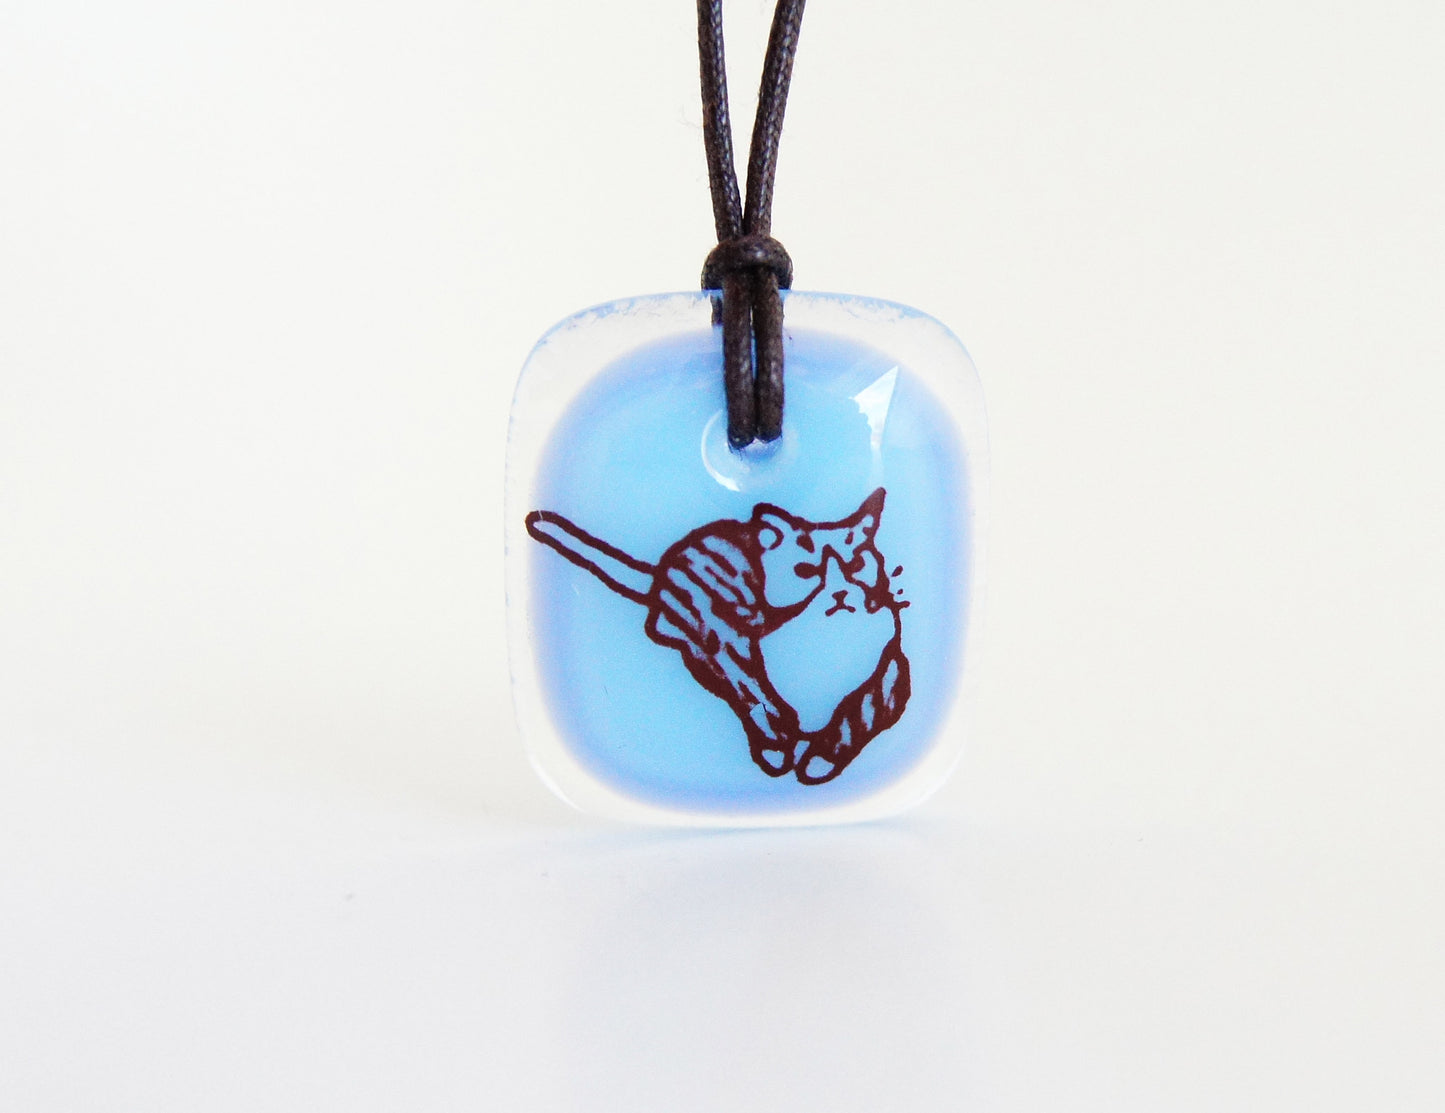 Striped Cat Necklace